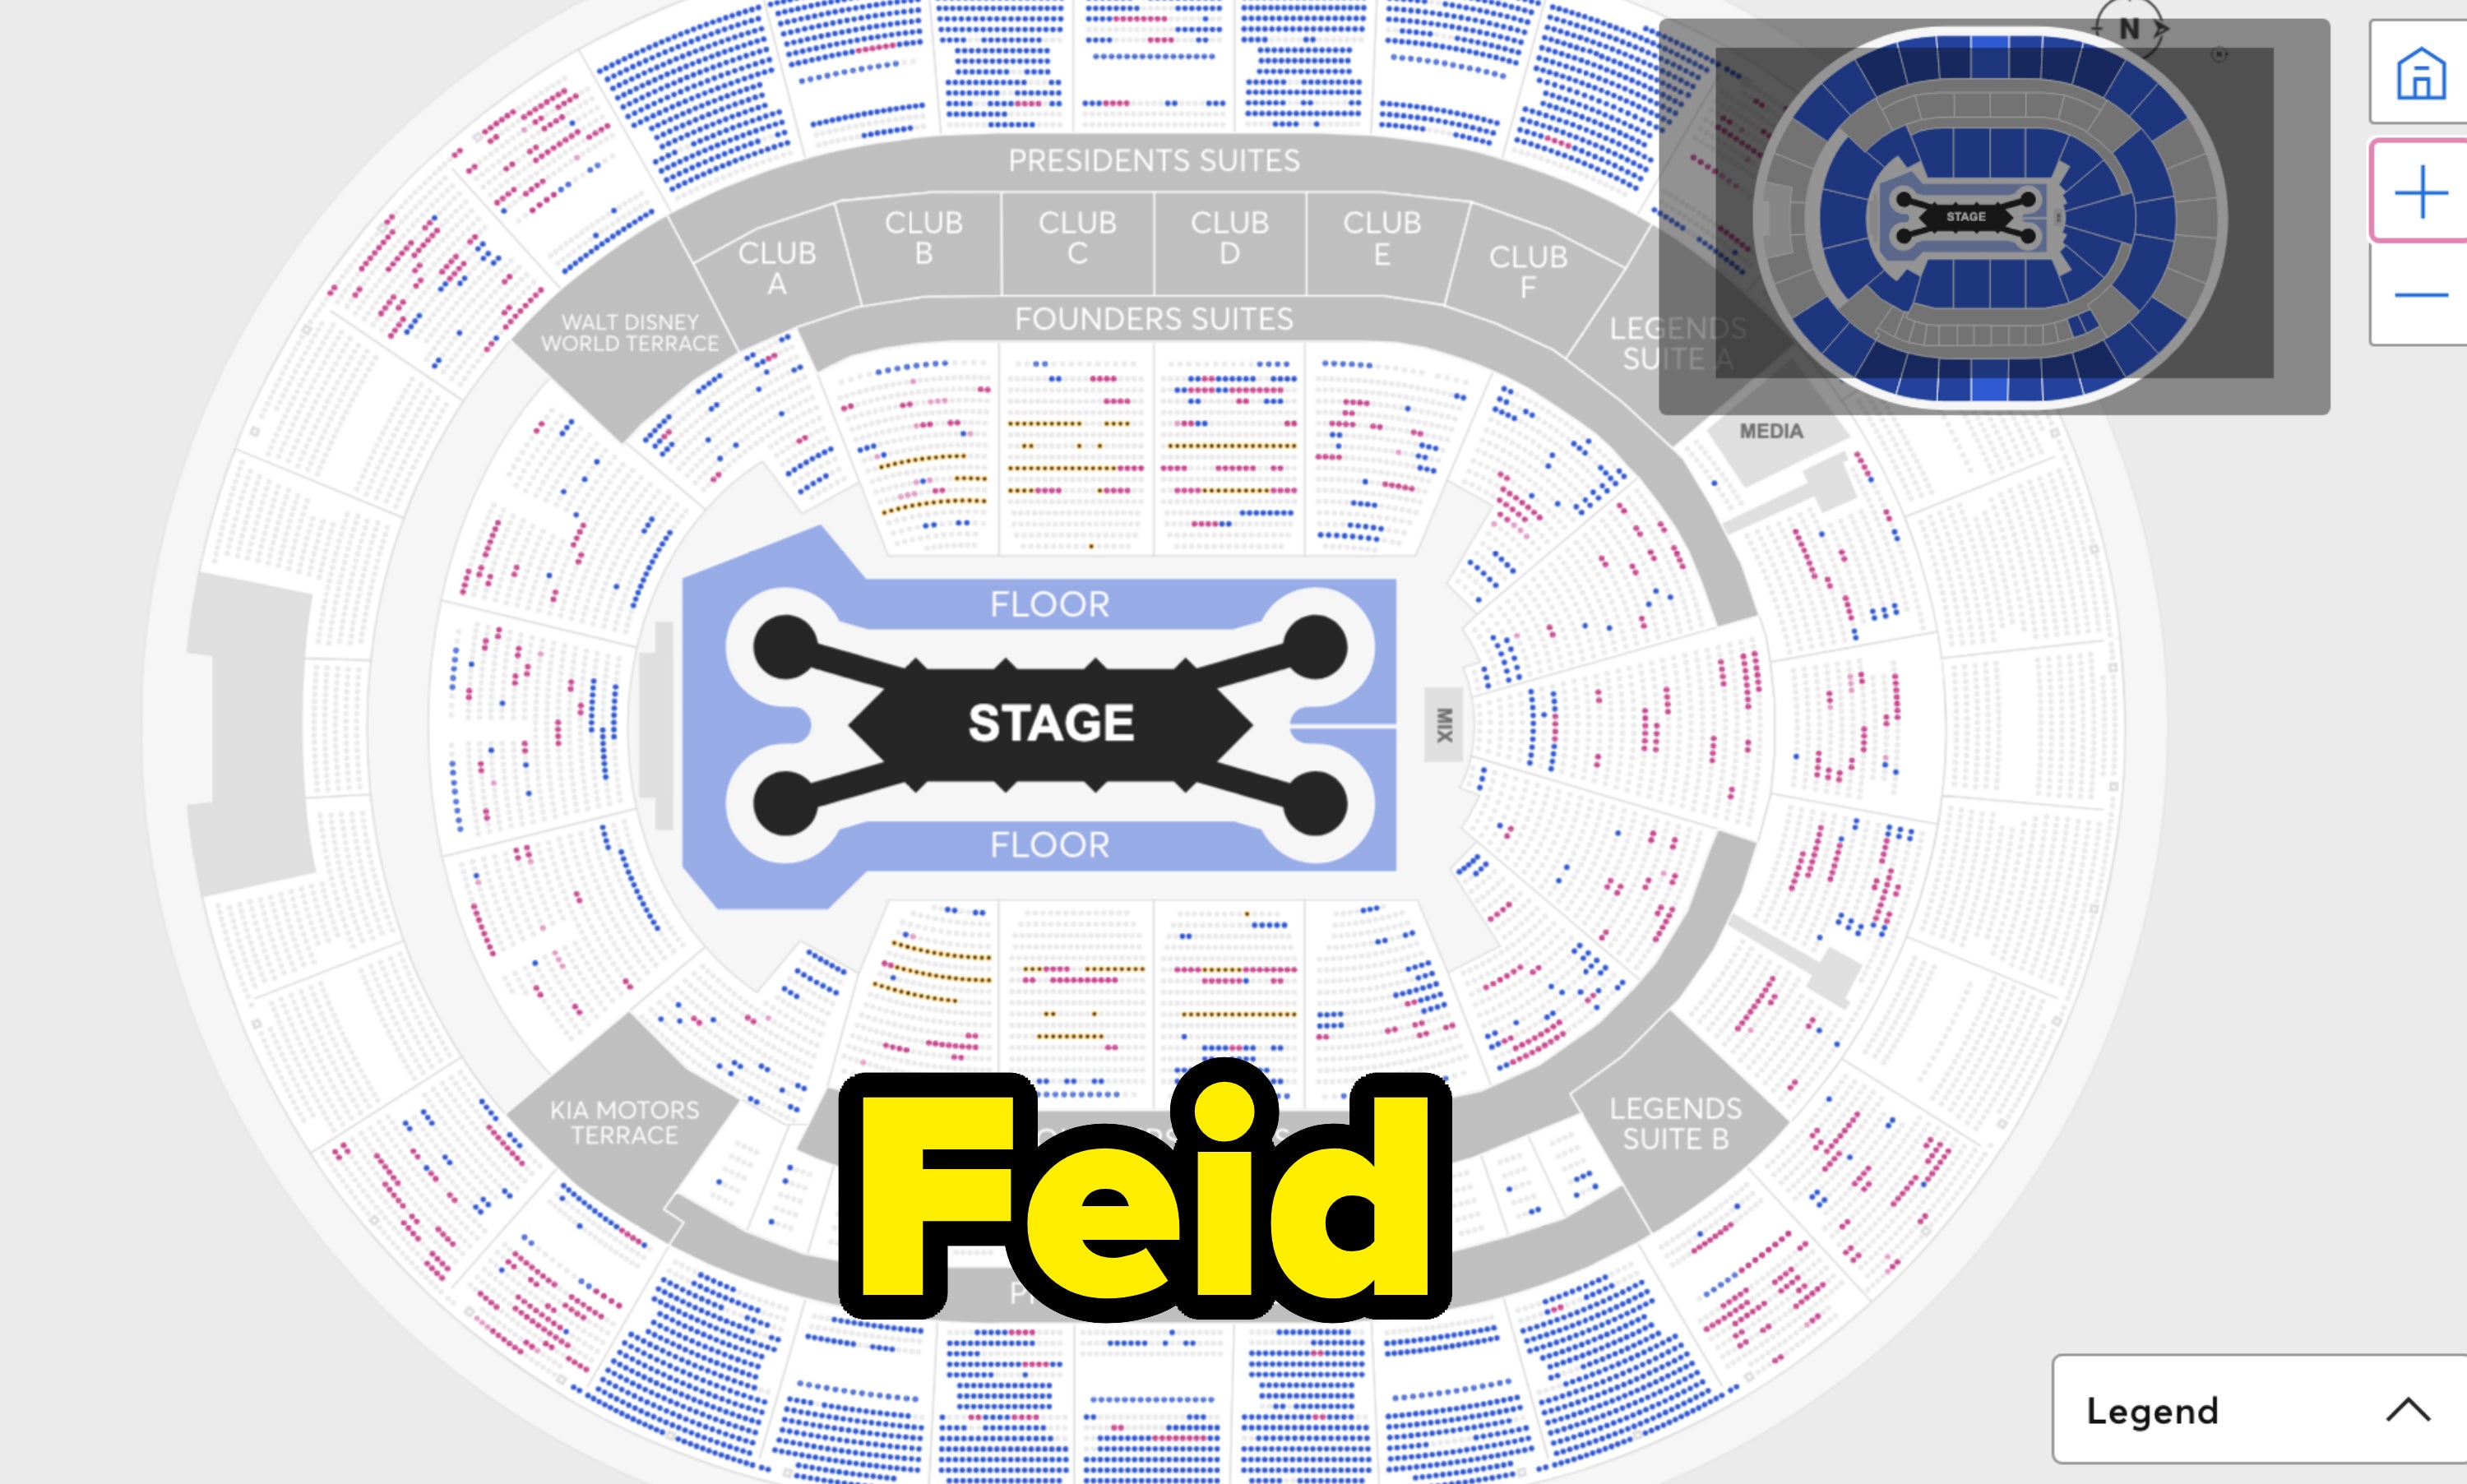 Seating chart with stage at center, surrounded by labeled sections including suites and clubs. Legend icon at bottom right